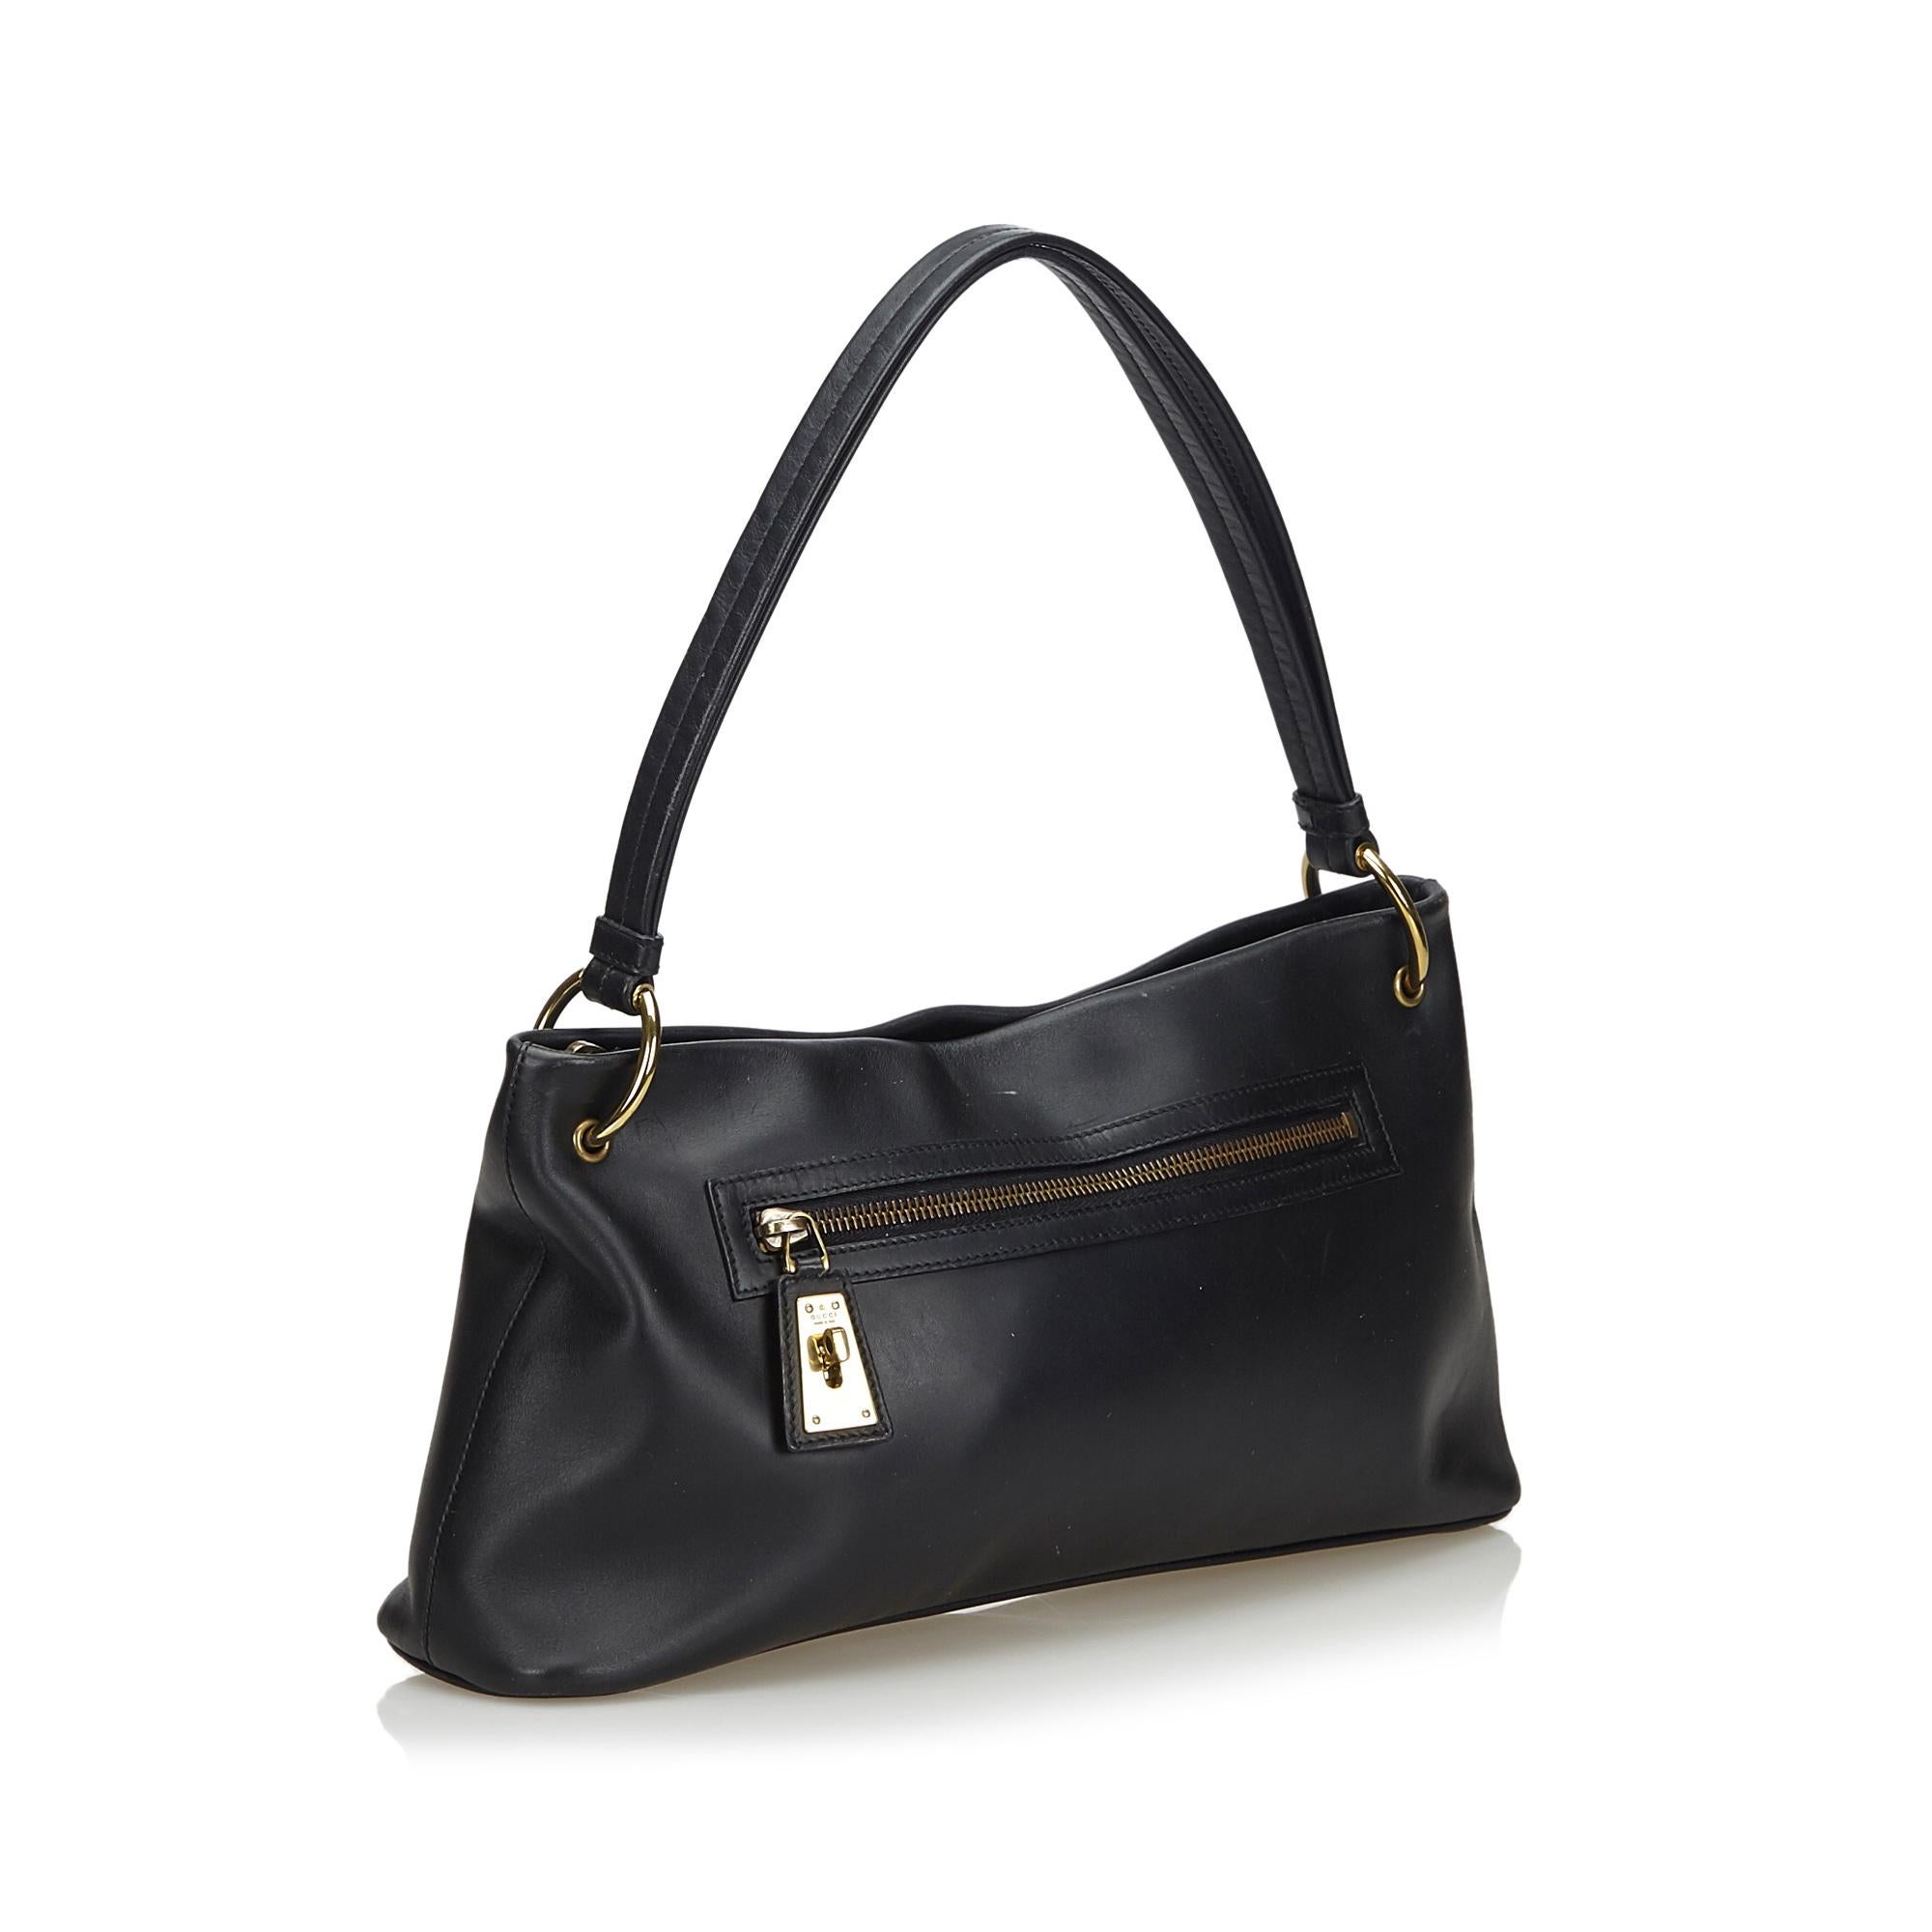 This shoulder bag features a leather body, rolled leather handles, a top zip closure, exterior zip pocket, and an interior zip pocket. It carries as B+ condition rating.

Inclusions: 
This item does not come with inclusions.

Dimensions:
Length: